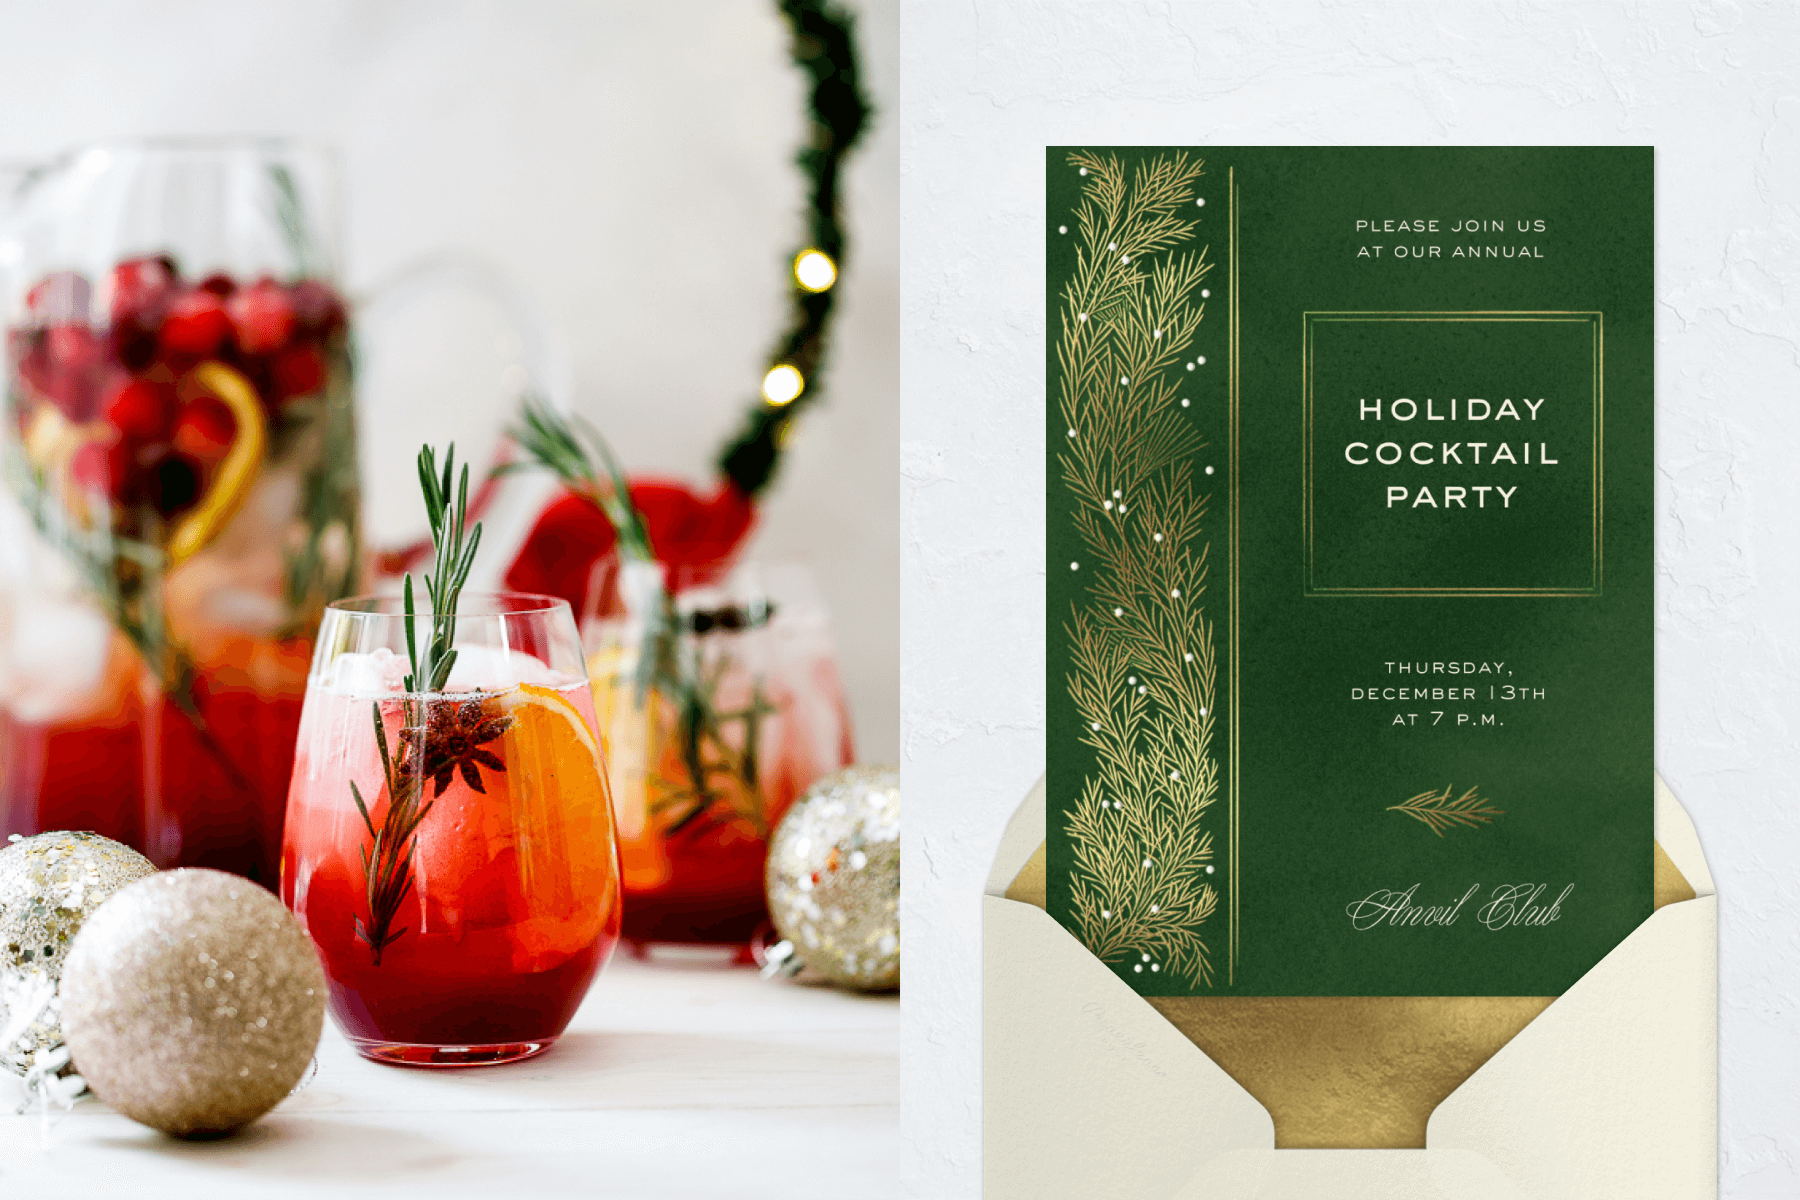 Red drinks with rosemary garnishes beside glittery ball ornaments; a green invitation with gold fir branches up the left side. 